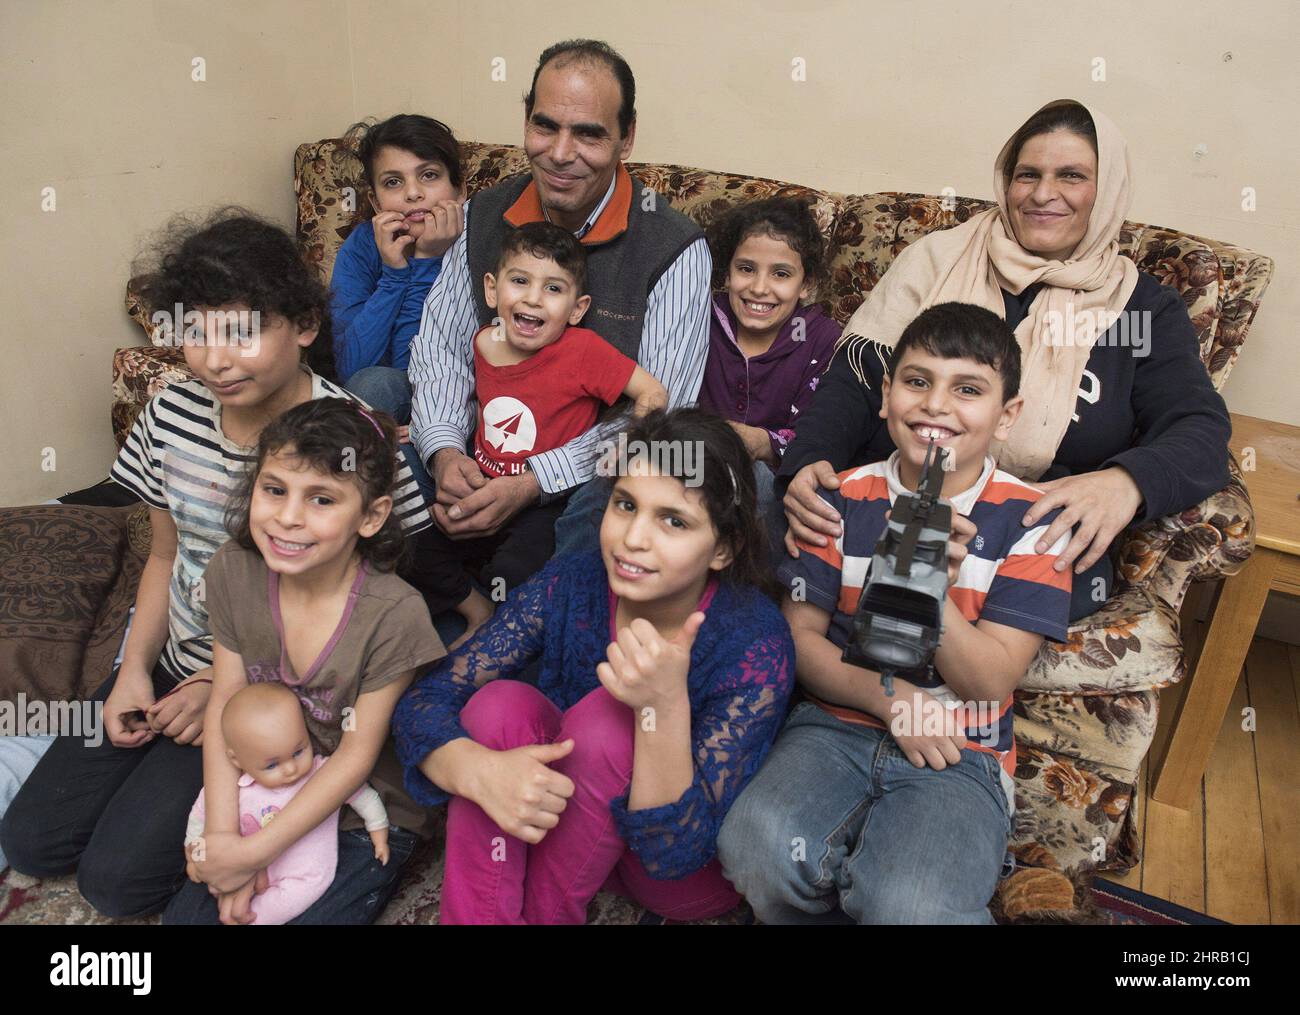 Abdel Al Shaikh, 10, front right, sits with his family in their home in Fredericton, N.B., Saturday, January 21, 2017. Abdel had a photo taken of him during Prime Minister Justin Trudeau's recent visit to Fredericton. In the photo he is holding his face because his brother Omar, in red, wouldnÃ¢Â€Â™t stop bothering him which was keeping him from hearing what Trudeau was saying. From left in front are: Najwa Al Shaikh, 11; Mariam Al Shaikh, 5; Wesal Al Shaikh, 12; Abdel Al Shaikh, 10, back row: Rahaf Al Shaikh, 13; Hassan Al Shaikh, Dad; Omar Al Shaikh, 2; Khadija Al Shaikh, 10; and Radiya Al S Stock Photo